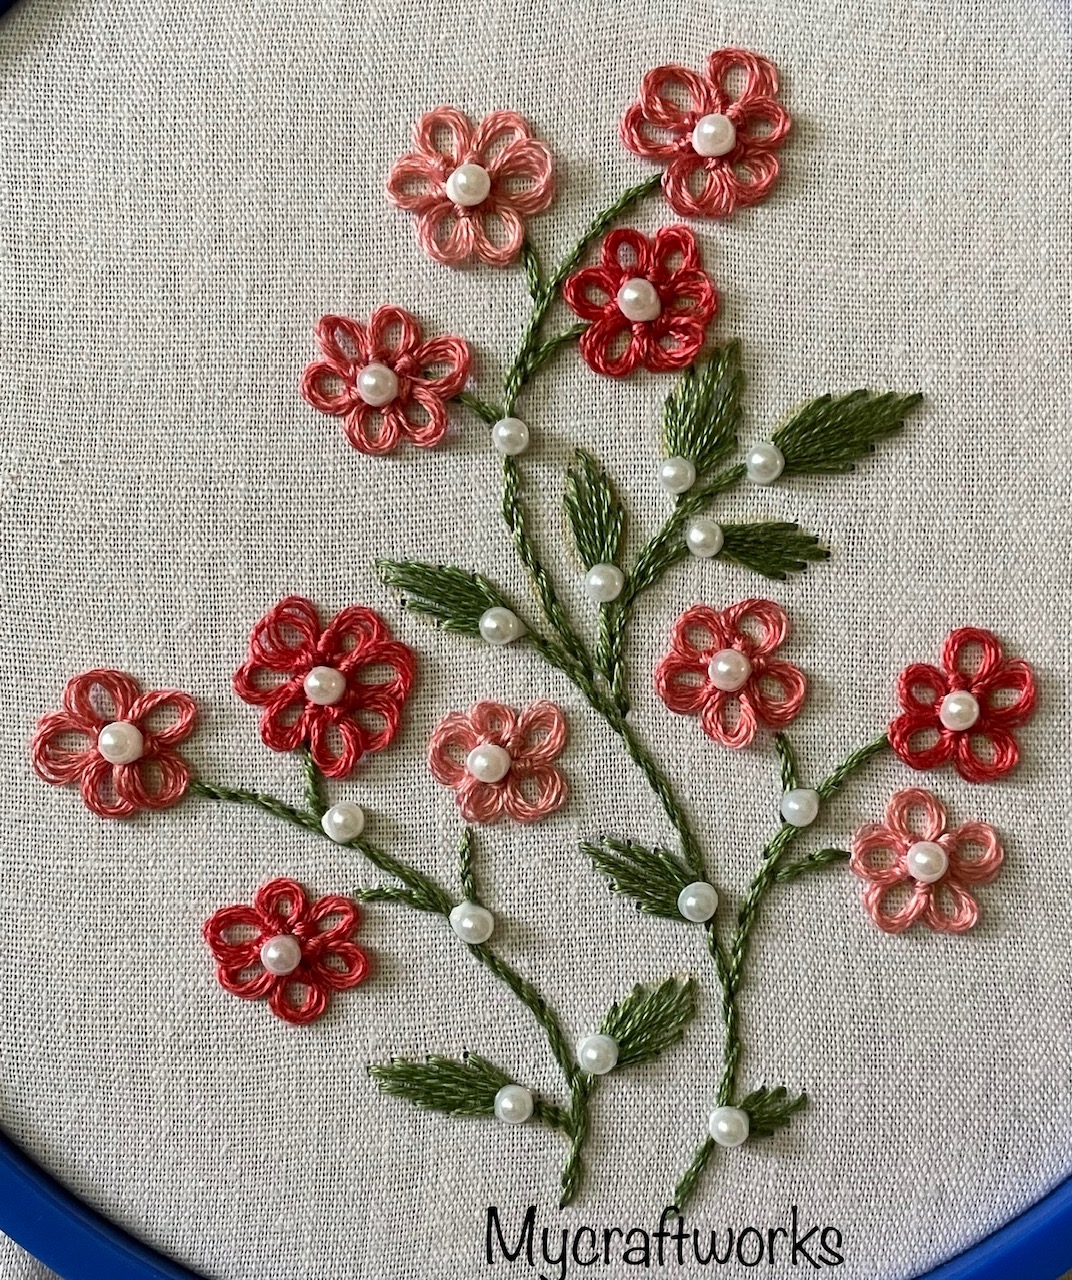 How to Back Stitch and Make French Knots on Cross Stitch Patterns